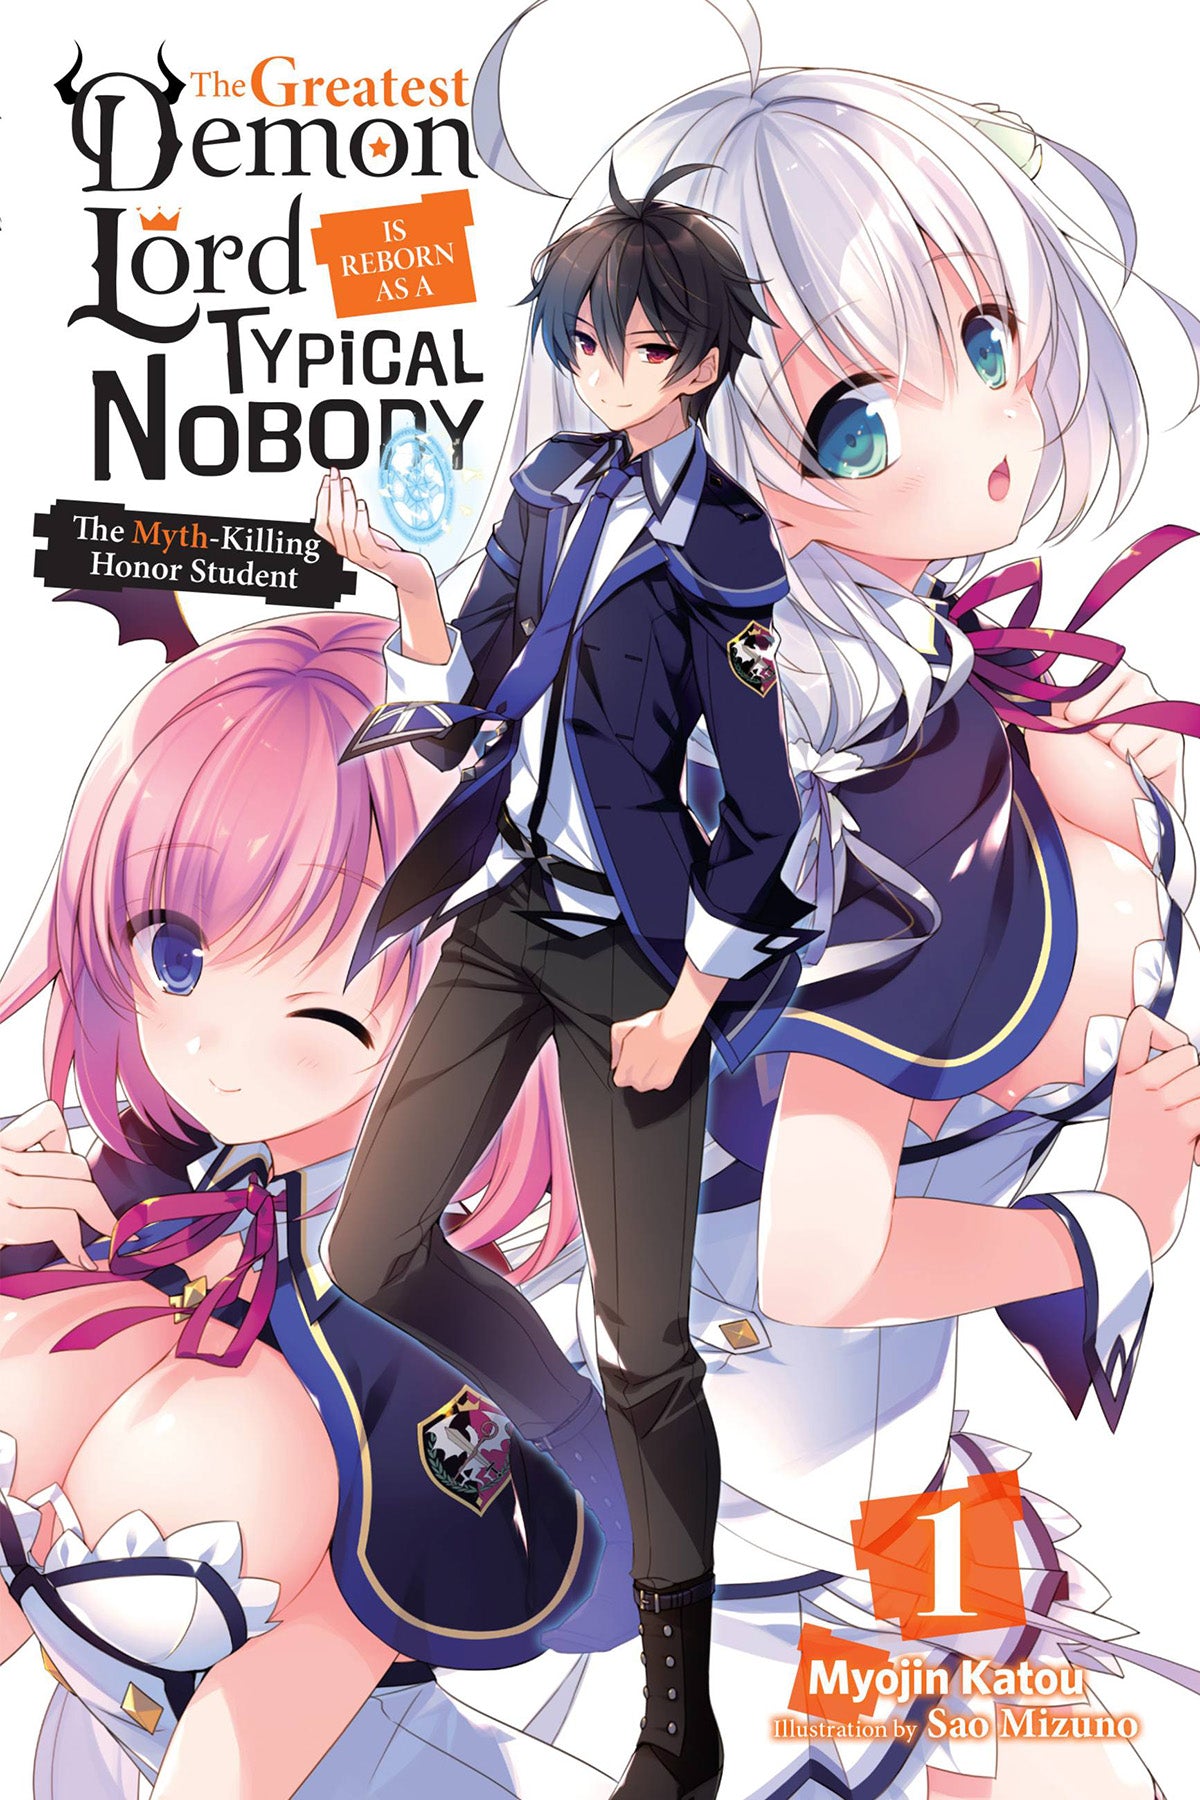 The Greatest Demon Lord Is Reborn as a Typical Nobody Side Story (Light Novel): The Wonderful Life of a Typical Nobody